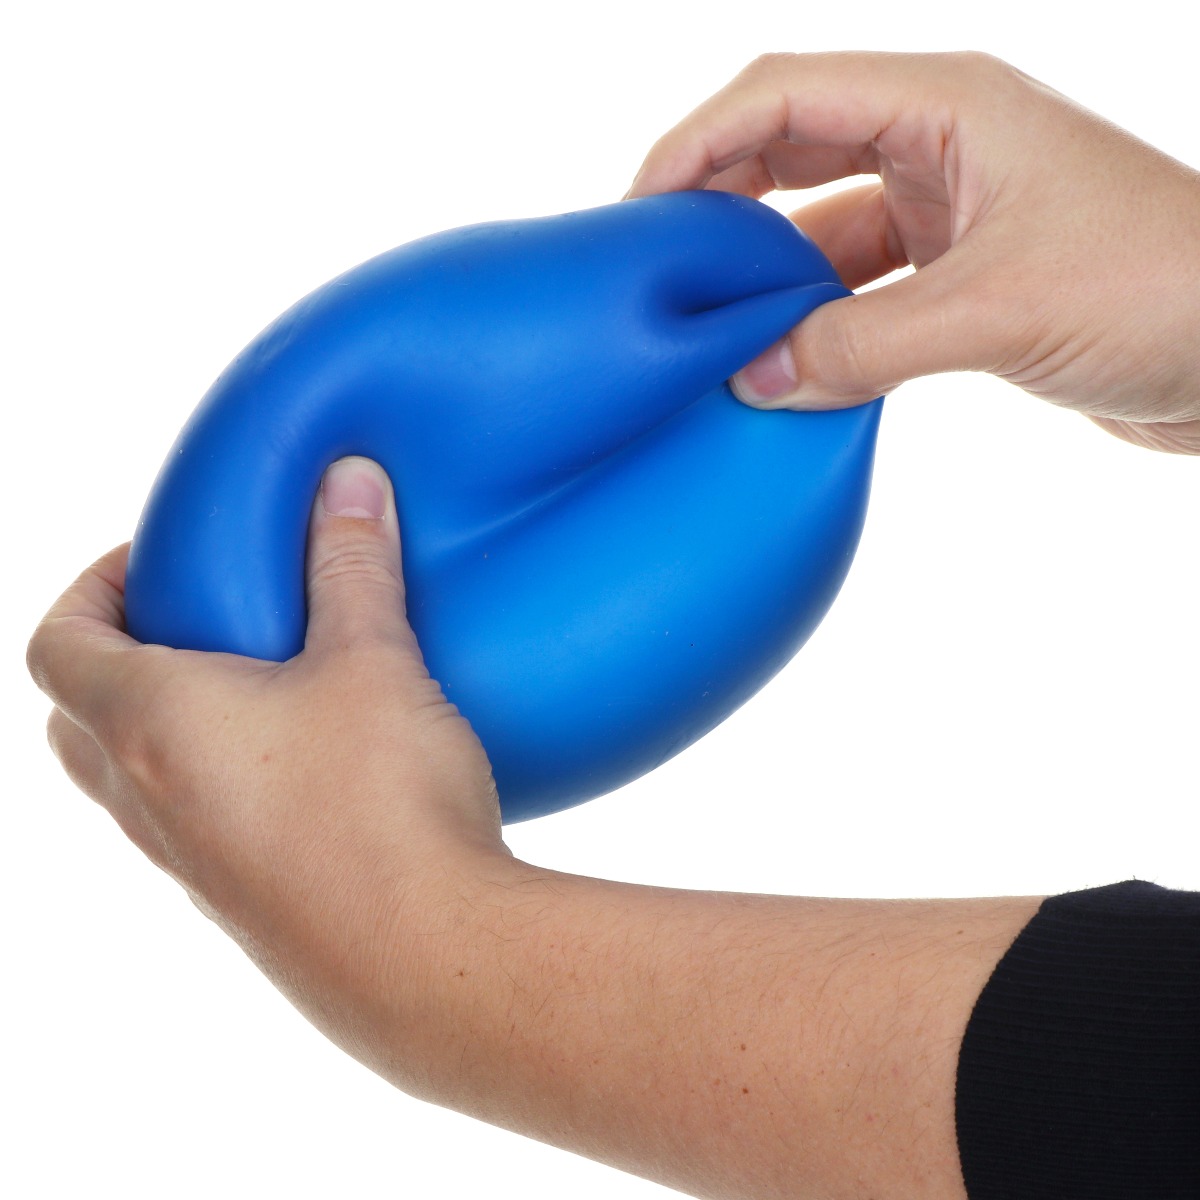 Buzzy Ultimate Stress Relief: Colossal Stress Buster Ball